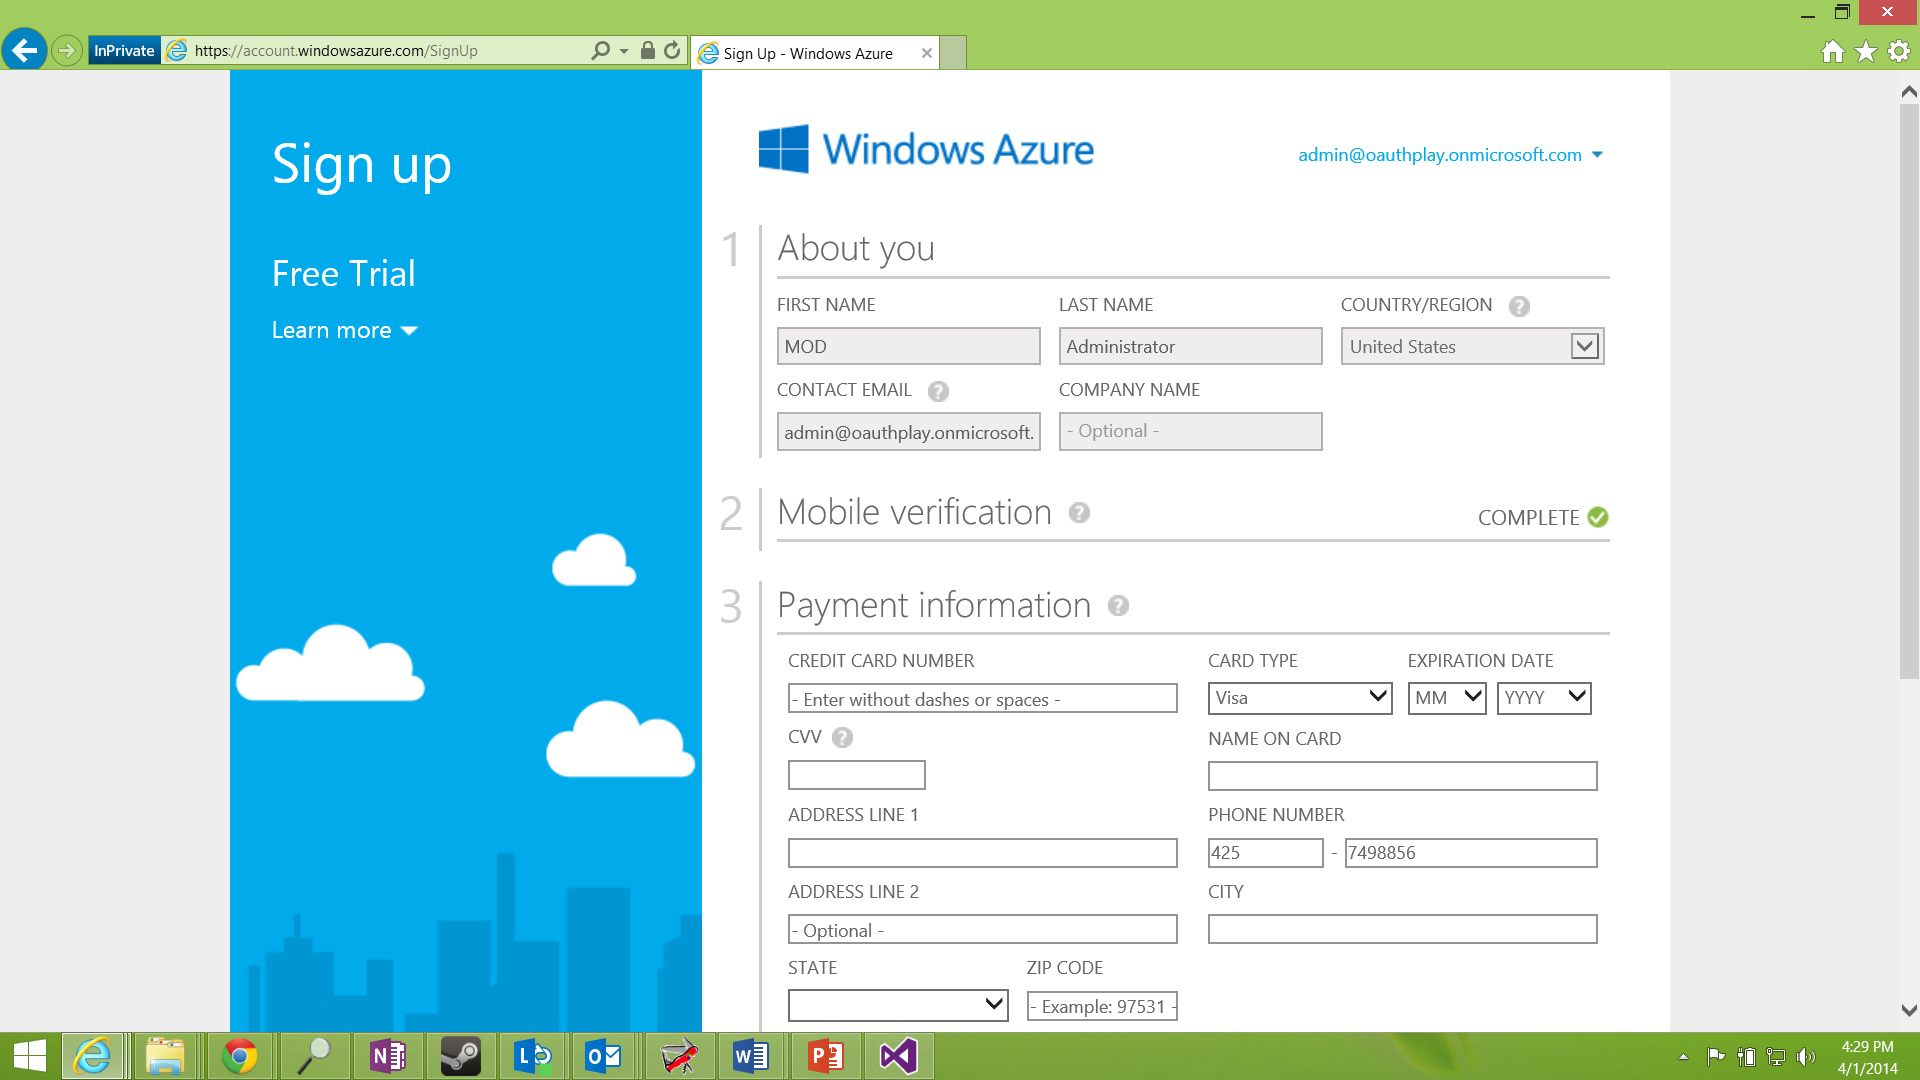 A screenshot of the "Payment information" section of the Azure sign-up page.